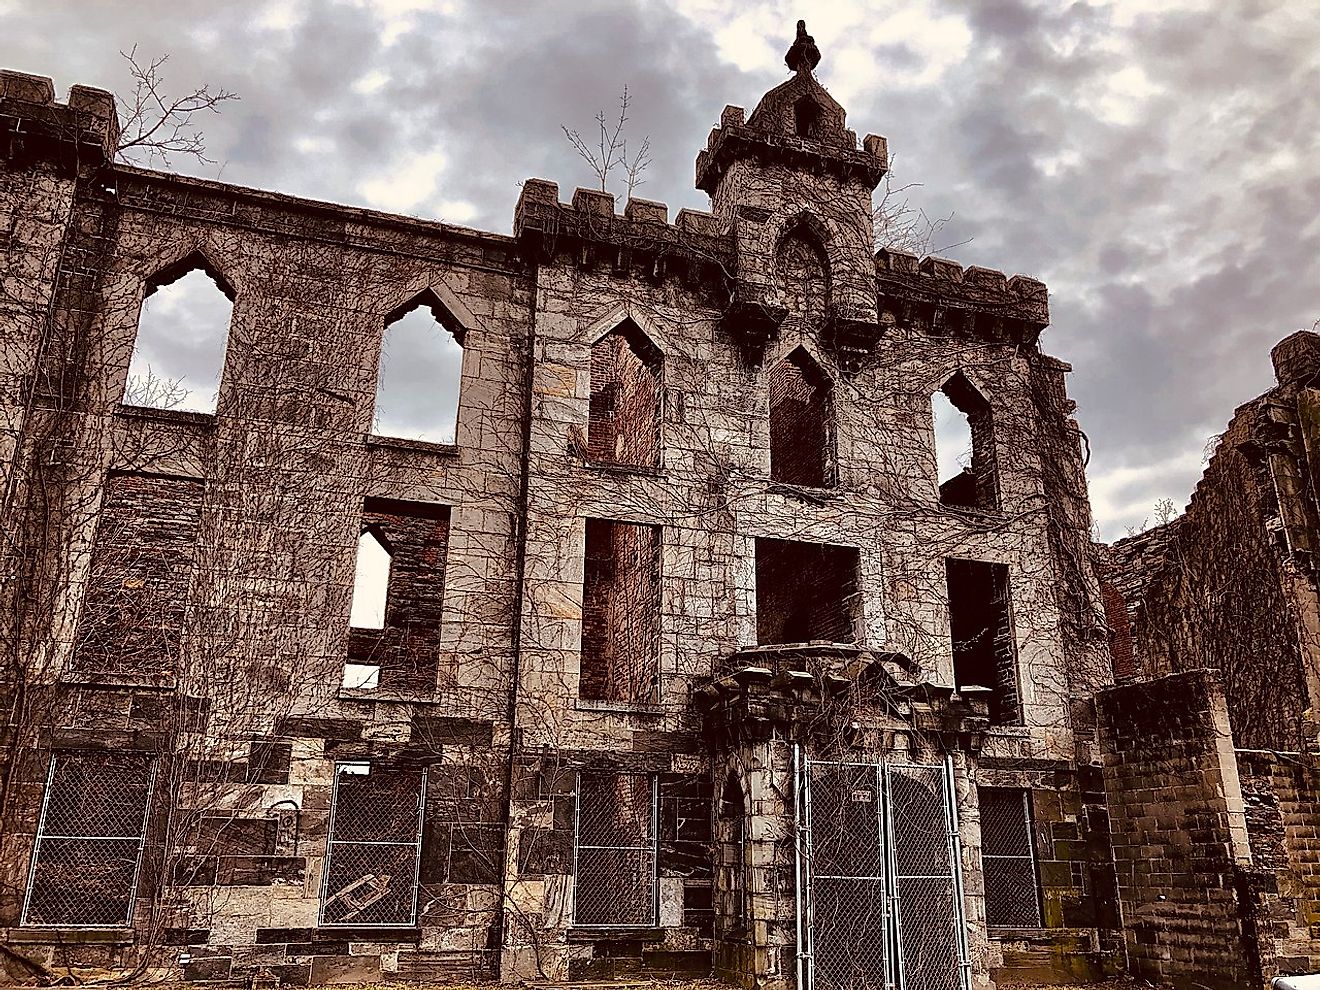 The Renwick Smallpox Hospital on Roosevelt Island in April 2019. Image credit: Chris6d/Wikimedia.org